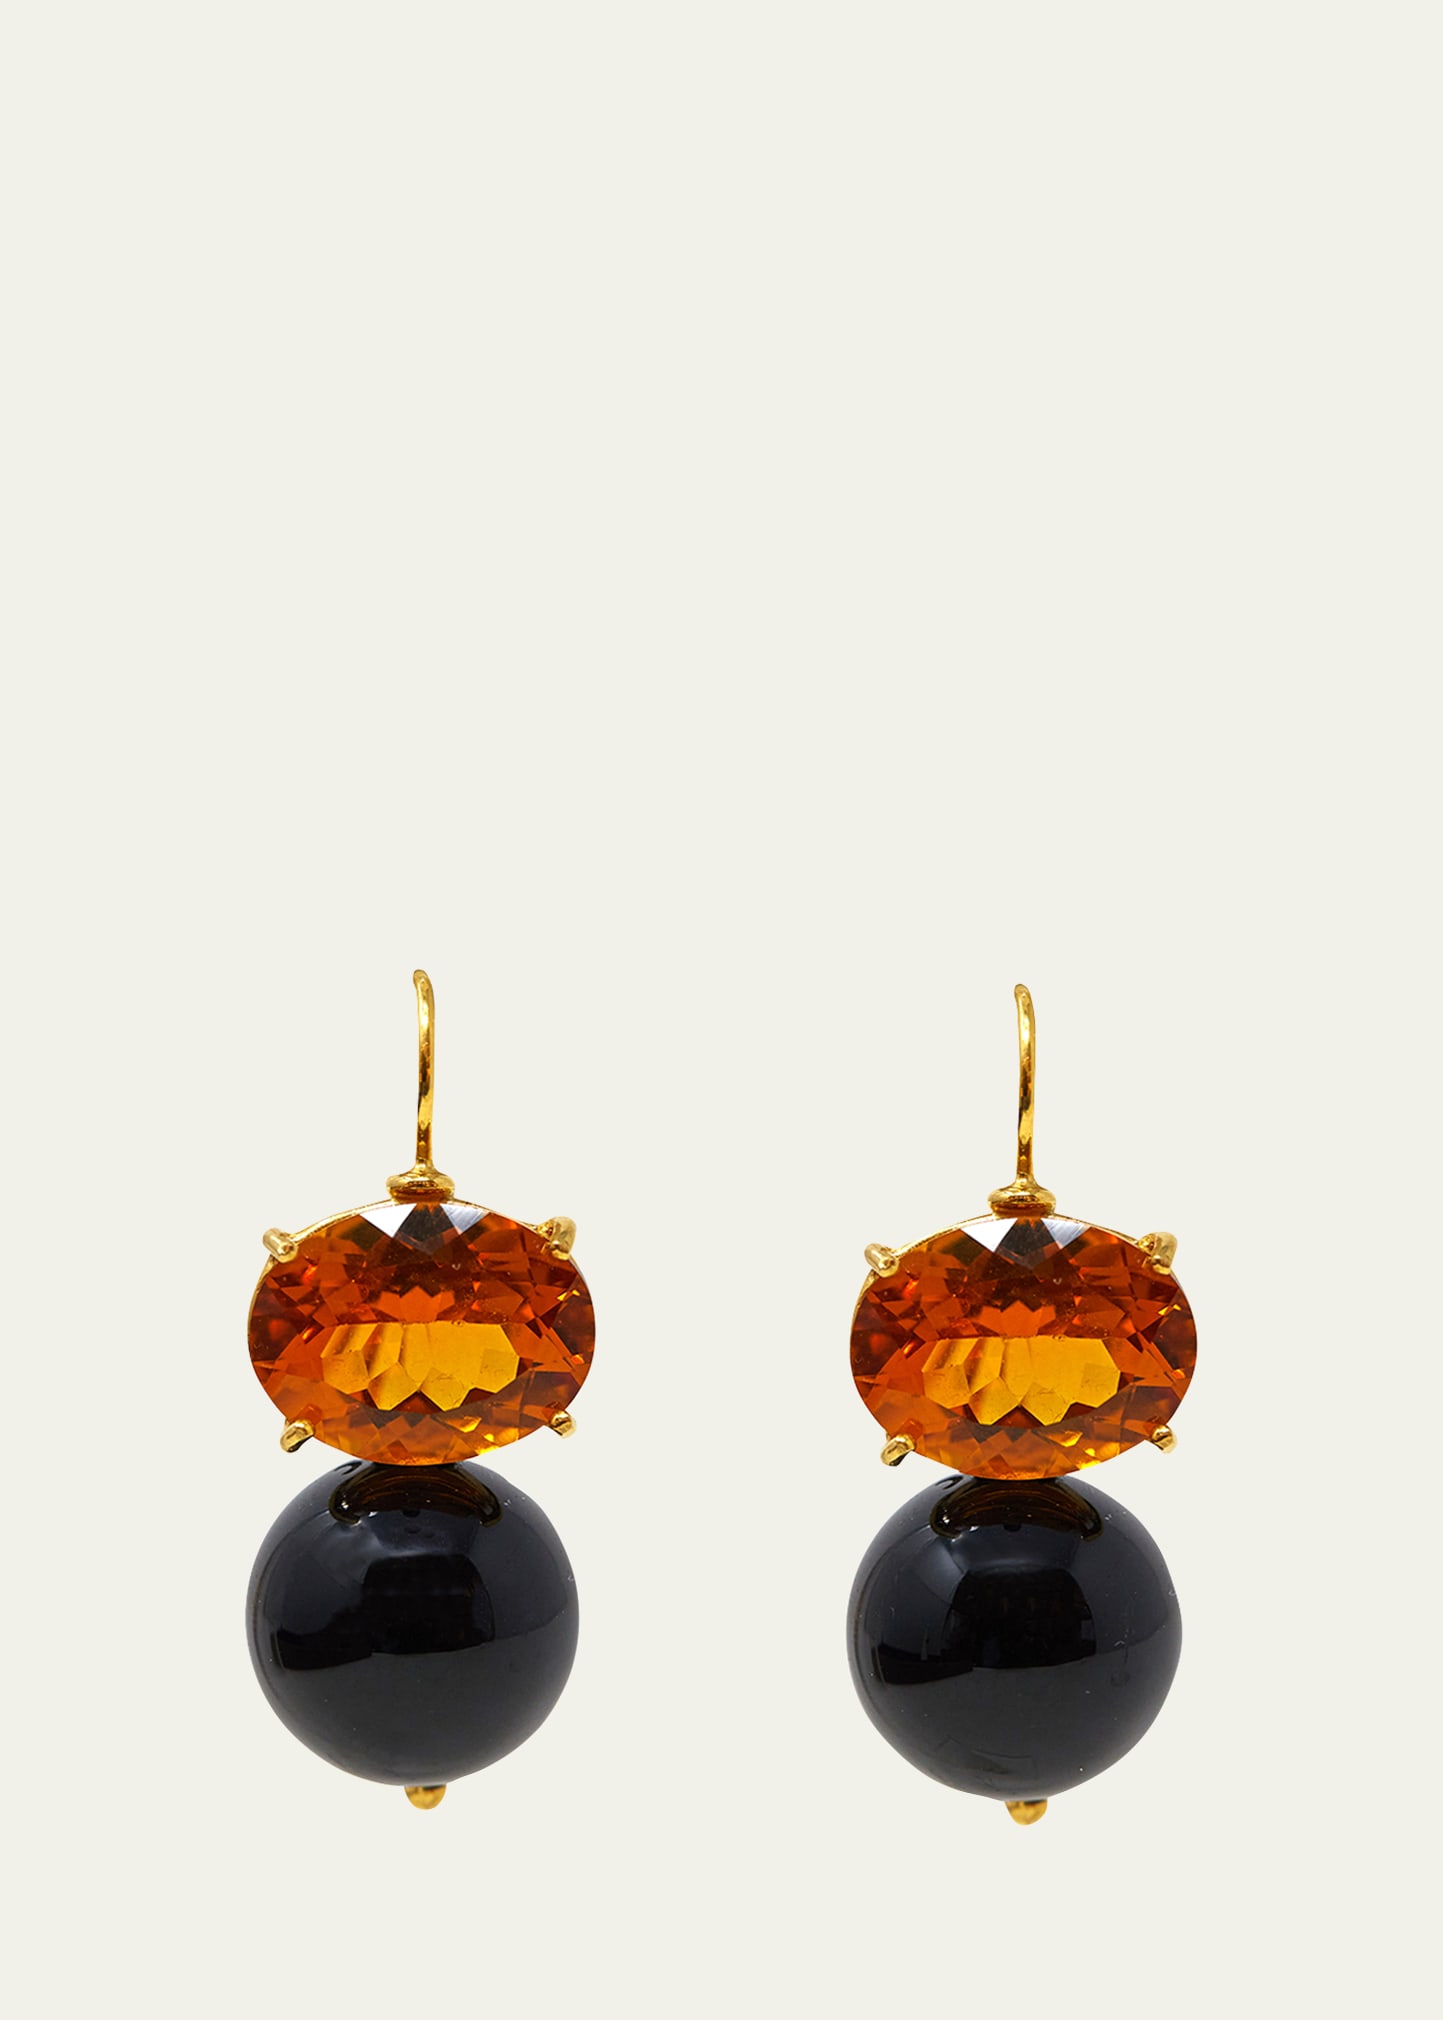 Grazia And Marica Vozza 18k Yellow Gold Hook Earrings With Onyx And Citrine Quartz In Multi